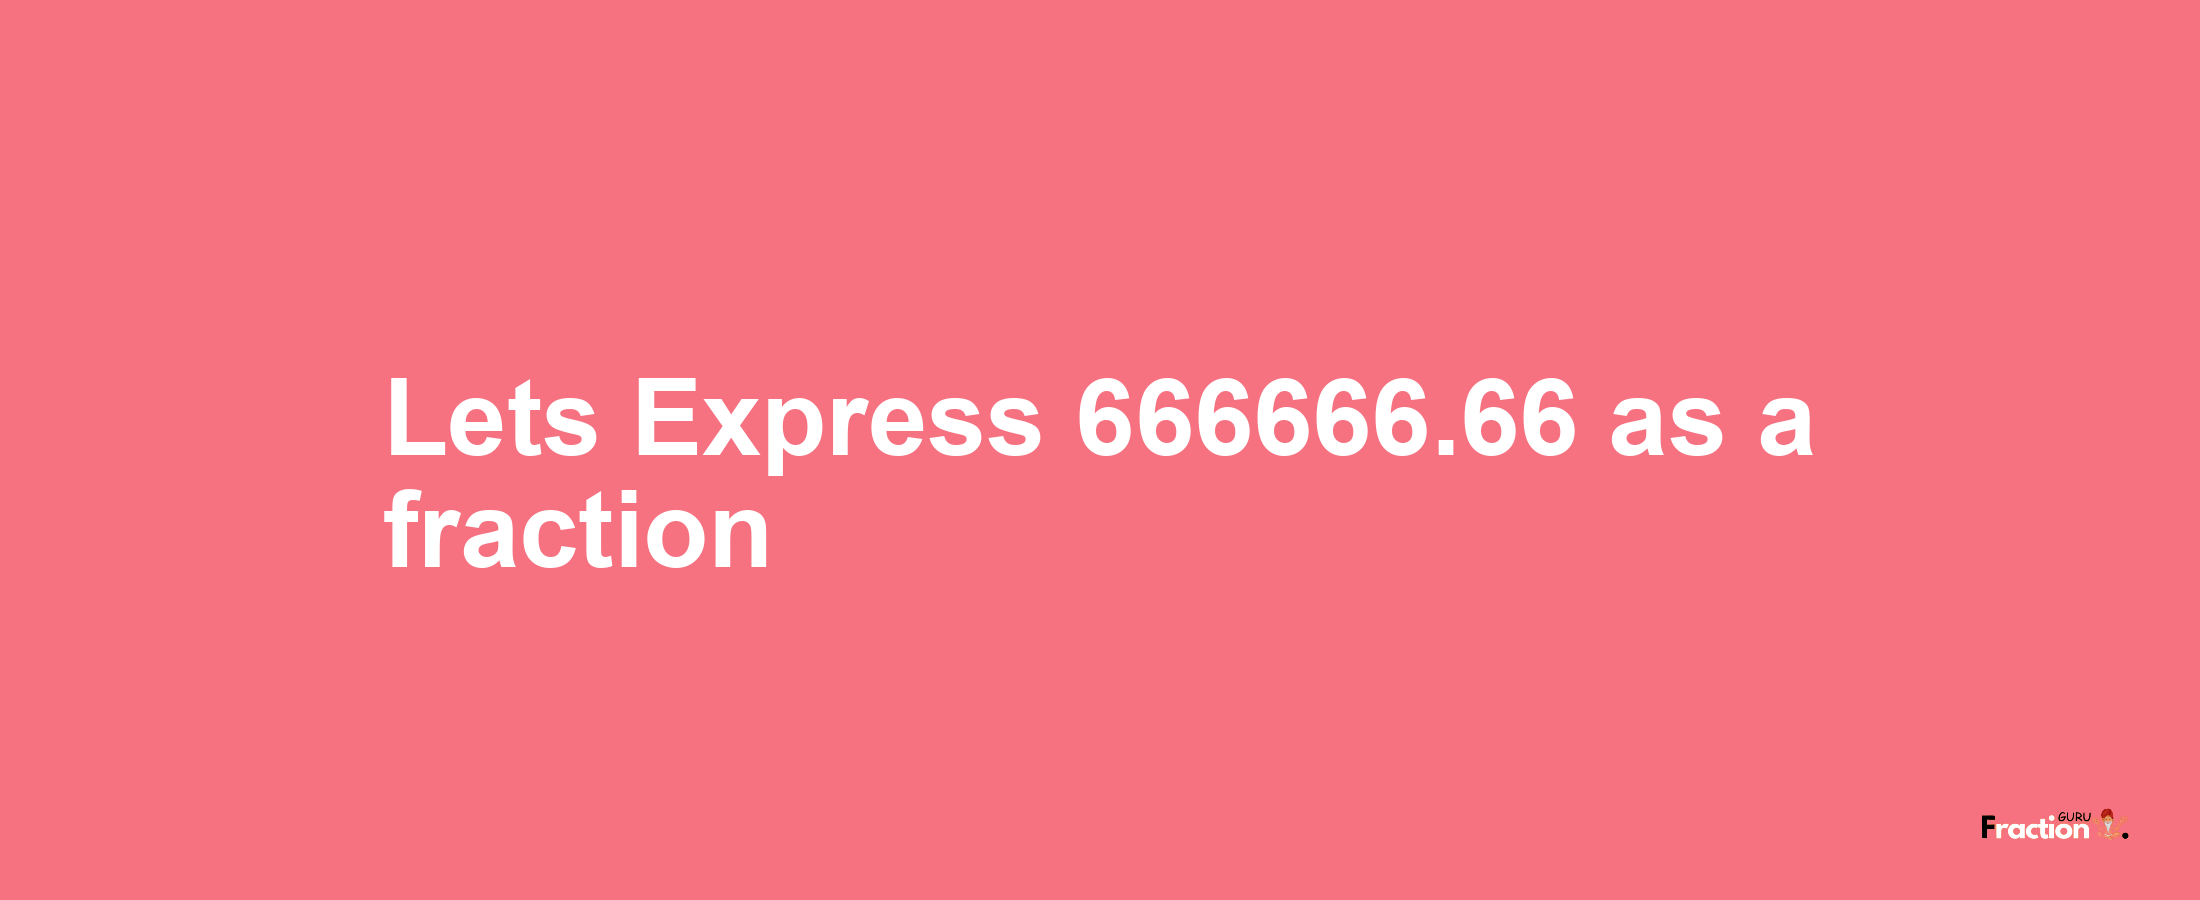 Lets Express 666666.66 as afraction